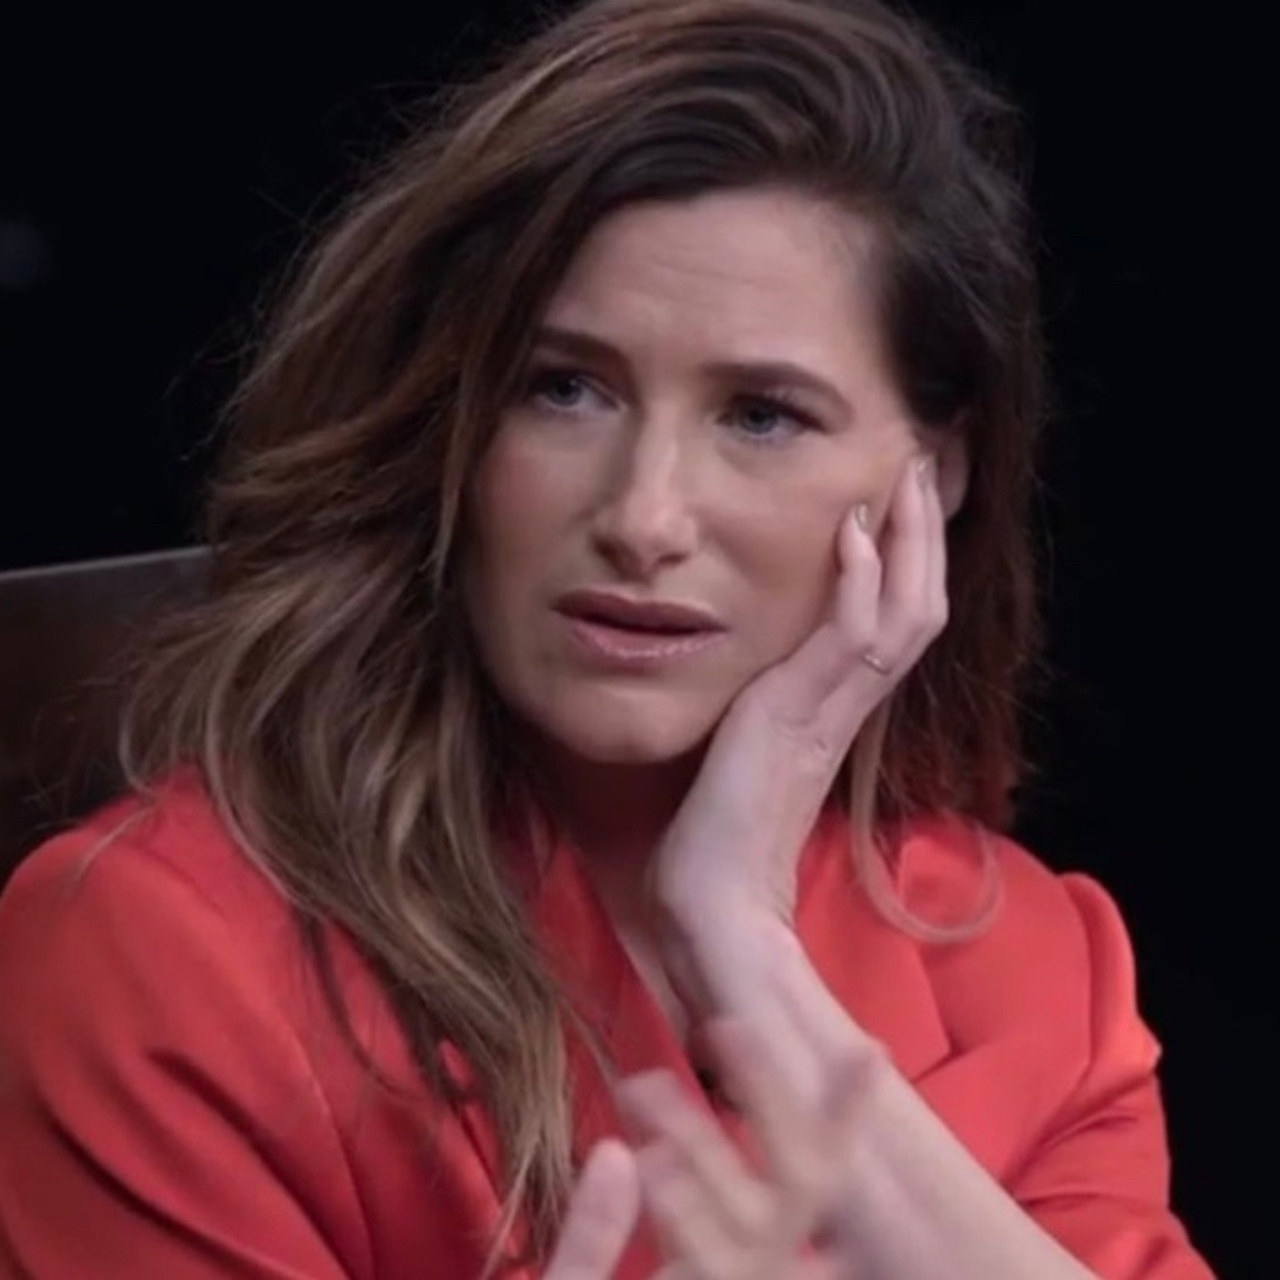 Kathryn Hahn during an Actress Roundtable discussion for the Hollywood Reporter